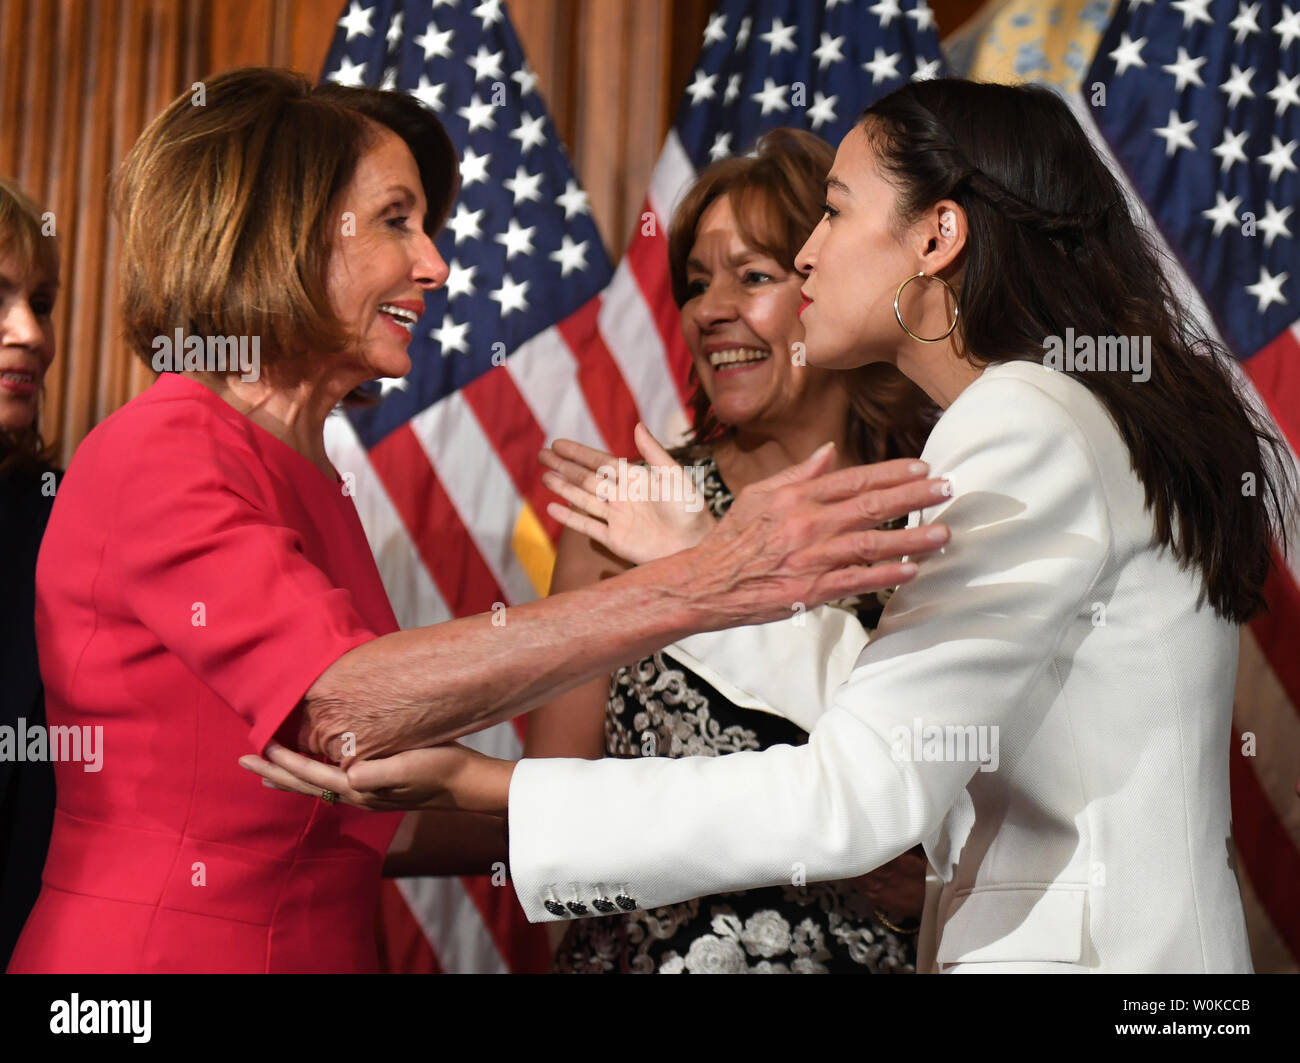 Newly elected Speaker of the House Nancy Pelosi hugs and kisses  Rep. Alexandria Ocasio-Cortez, D-NY, at a mock swearing-in event with family members at the U.S. Capitol in Washington, DC on January 3, 2019. Pelosi became the first official to return to that position since Sam Rayburn in 1955.  Ocasio-Cortez became the youngest woman ever in Congress at age 29.     Photo by Pat Benic/UPI Stock Photo